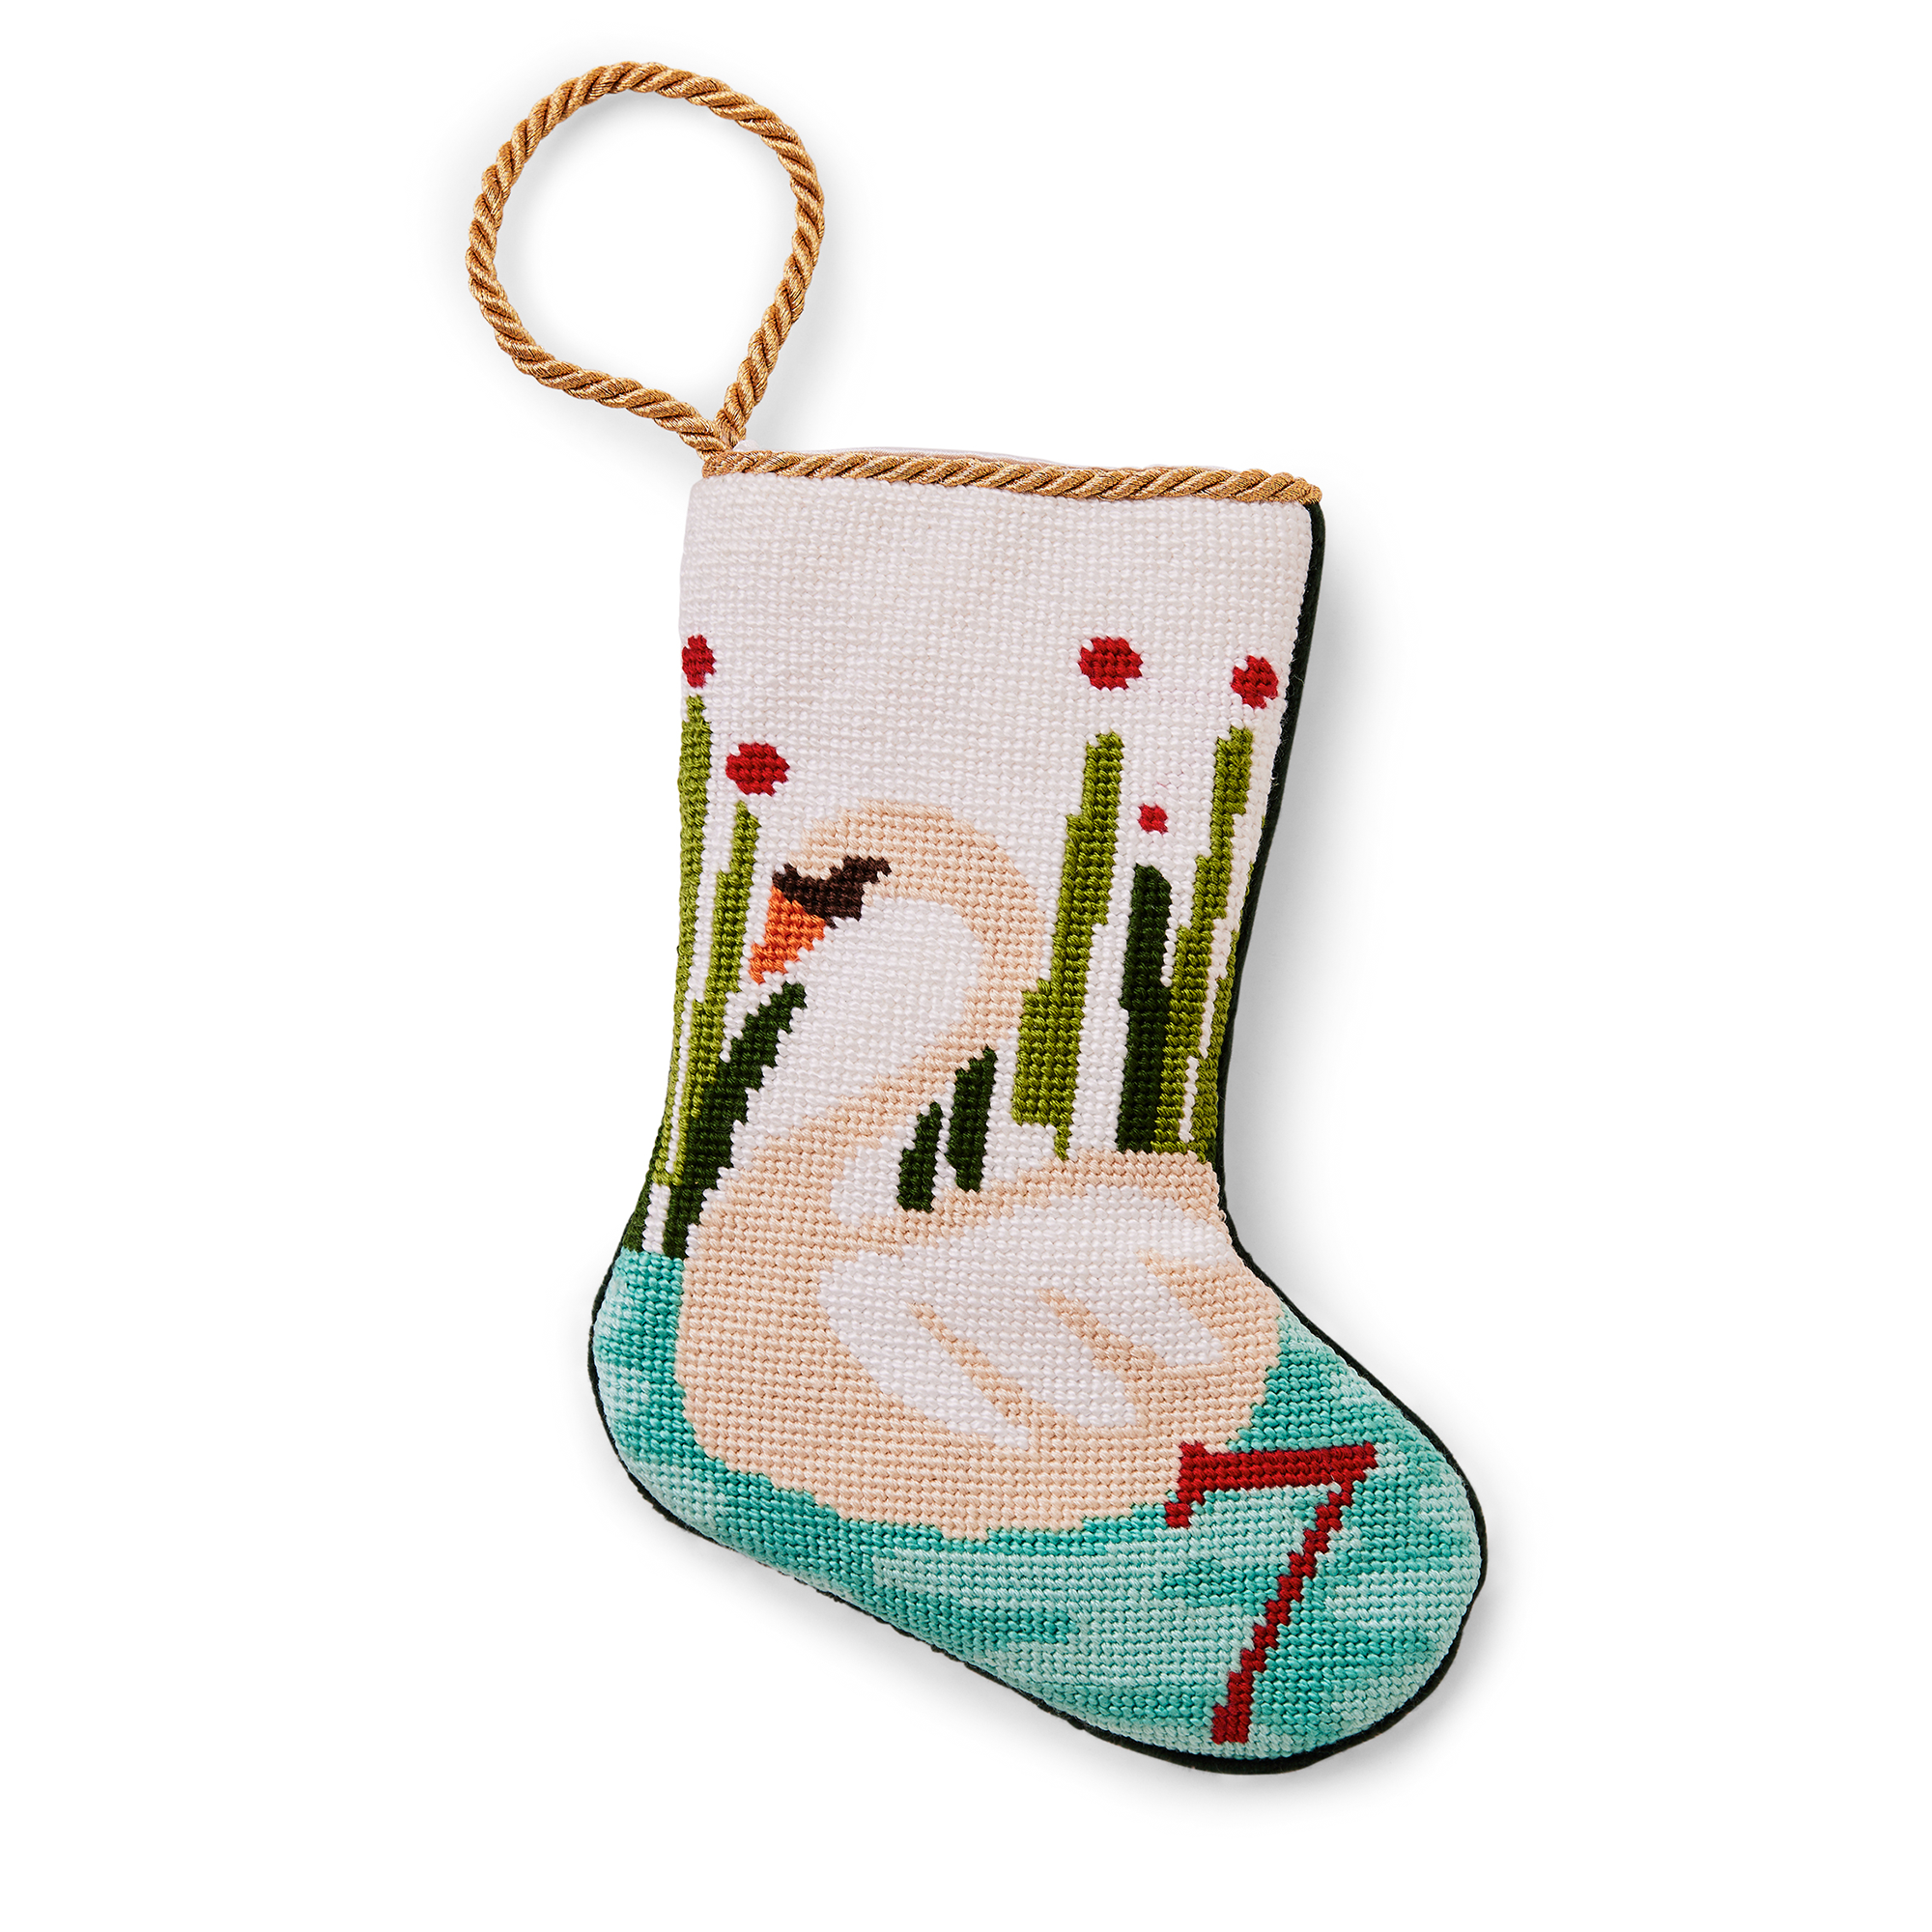 An intricately designed mini needlepoint stocking featuring the '7 Swans a Swimming' from the classic Christmas carol. This festive decoration adds a traditional and charming touch to your holiday decor. Perfect as tree ornaments, place settings, or for holding special gifts.